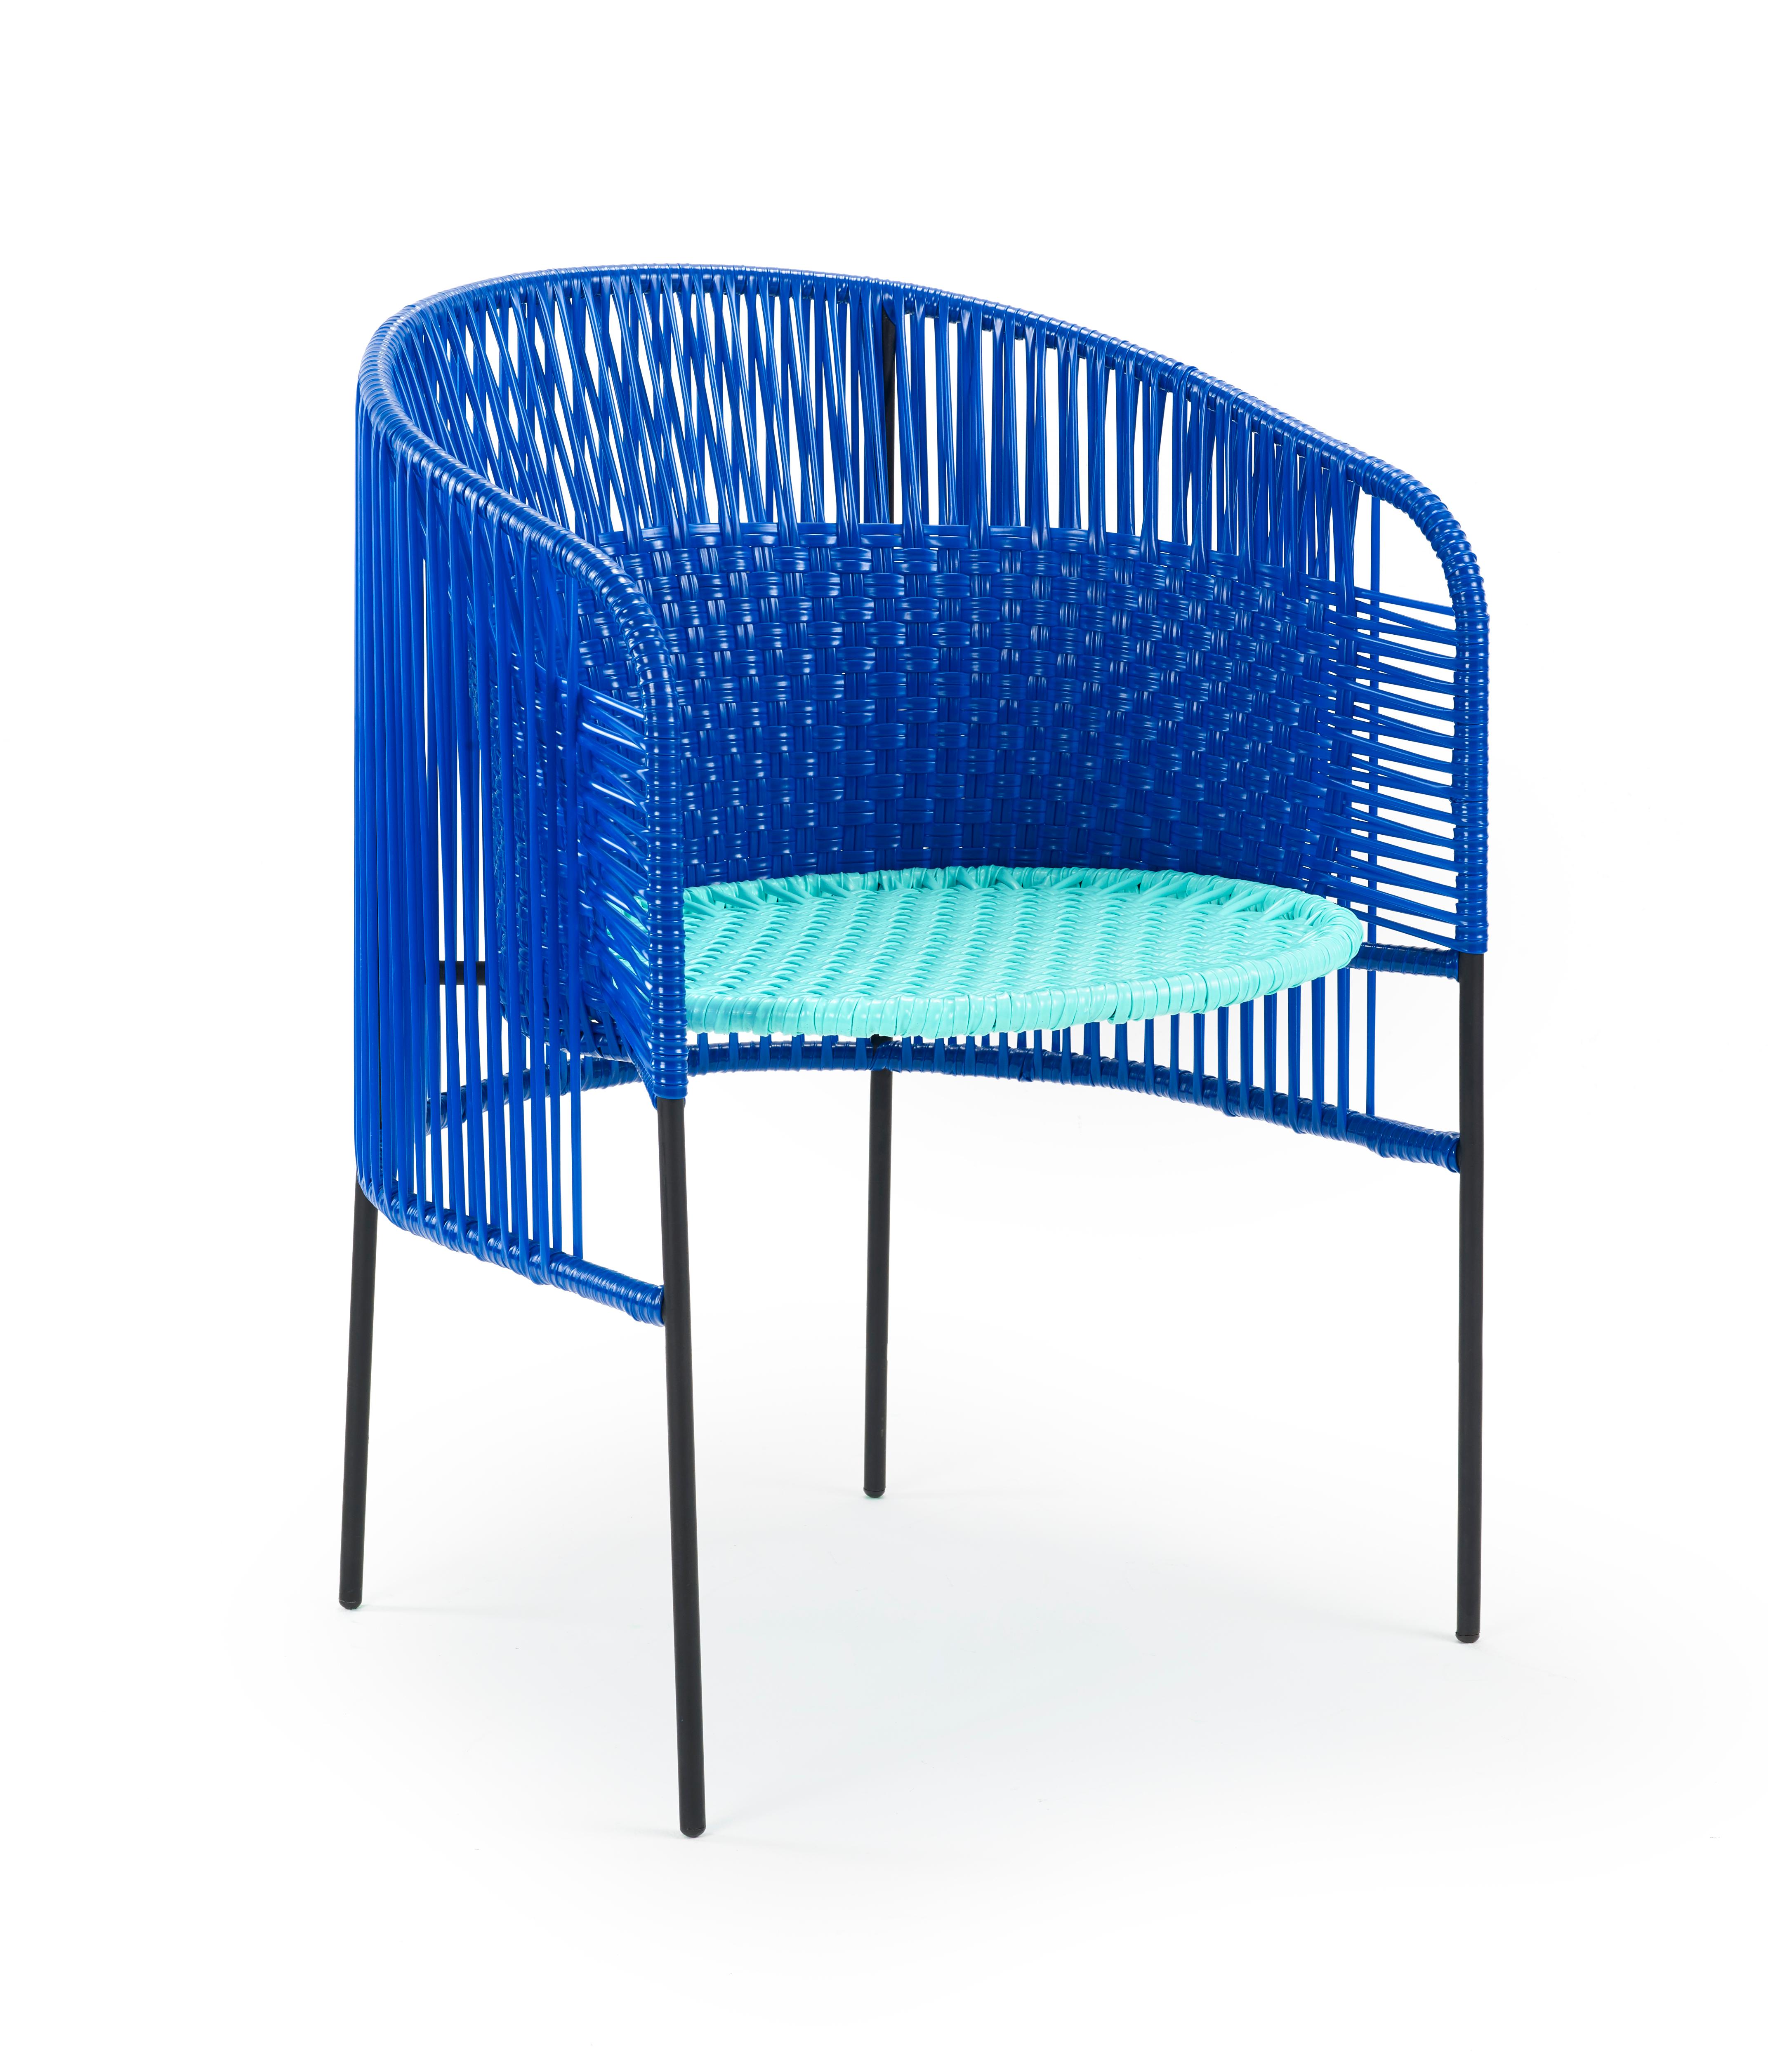 Set of 4 blue caribe dining chair by Sebastian Herkner.
Materials: galvanized and powder-coated tubular steel. PVC strings are made from recycled plastic.
Technique: Made from recycled plastic and weaved by local craftspeople in Colombia.